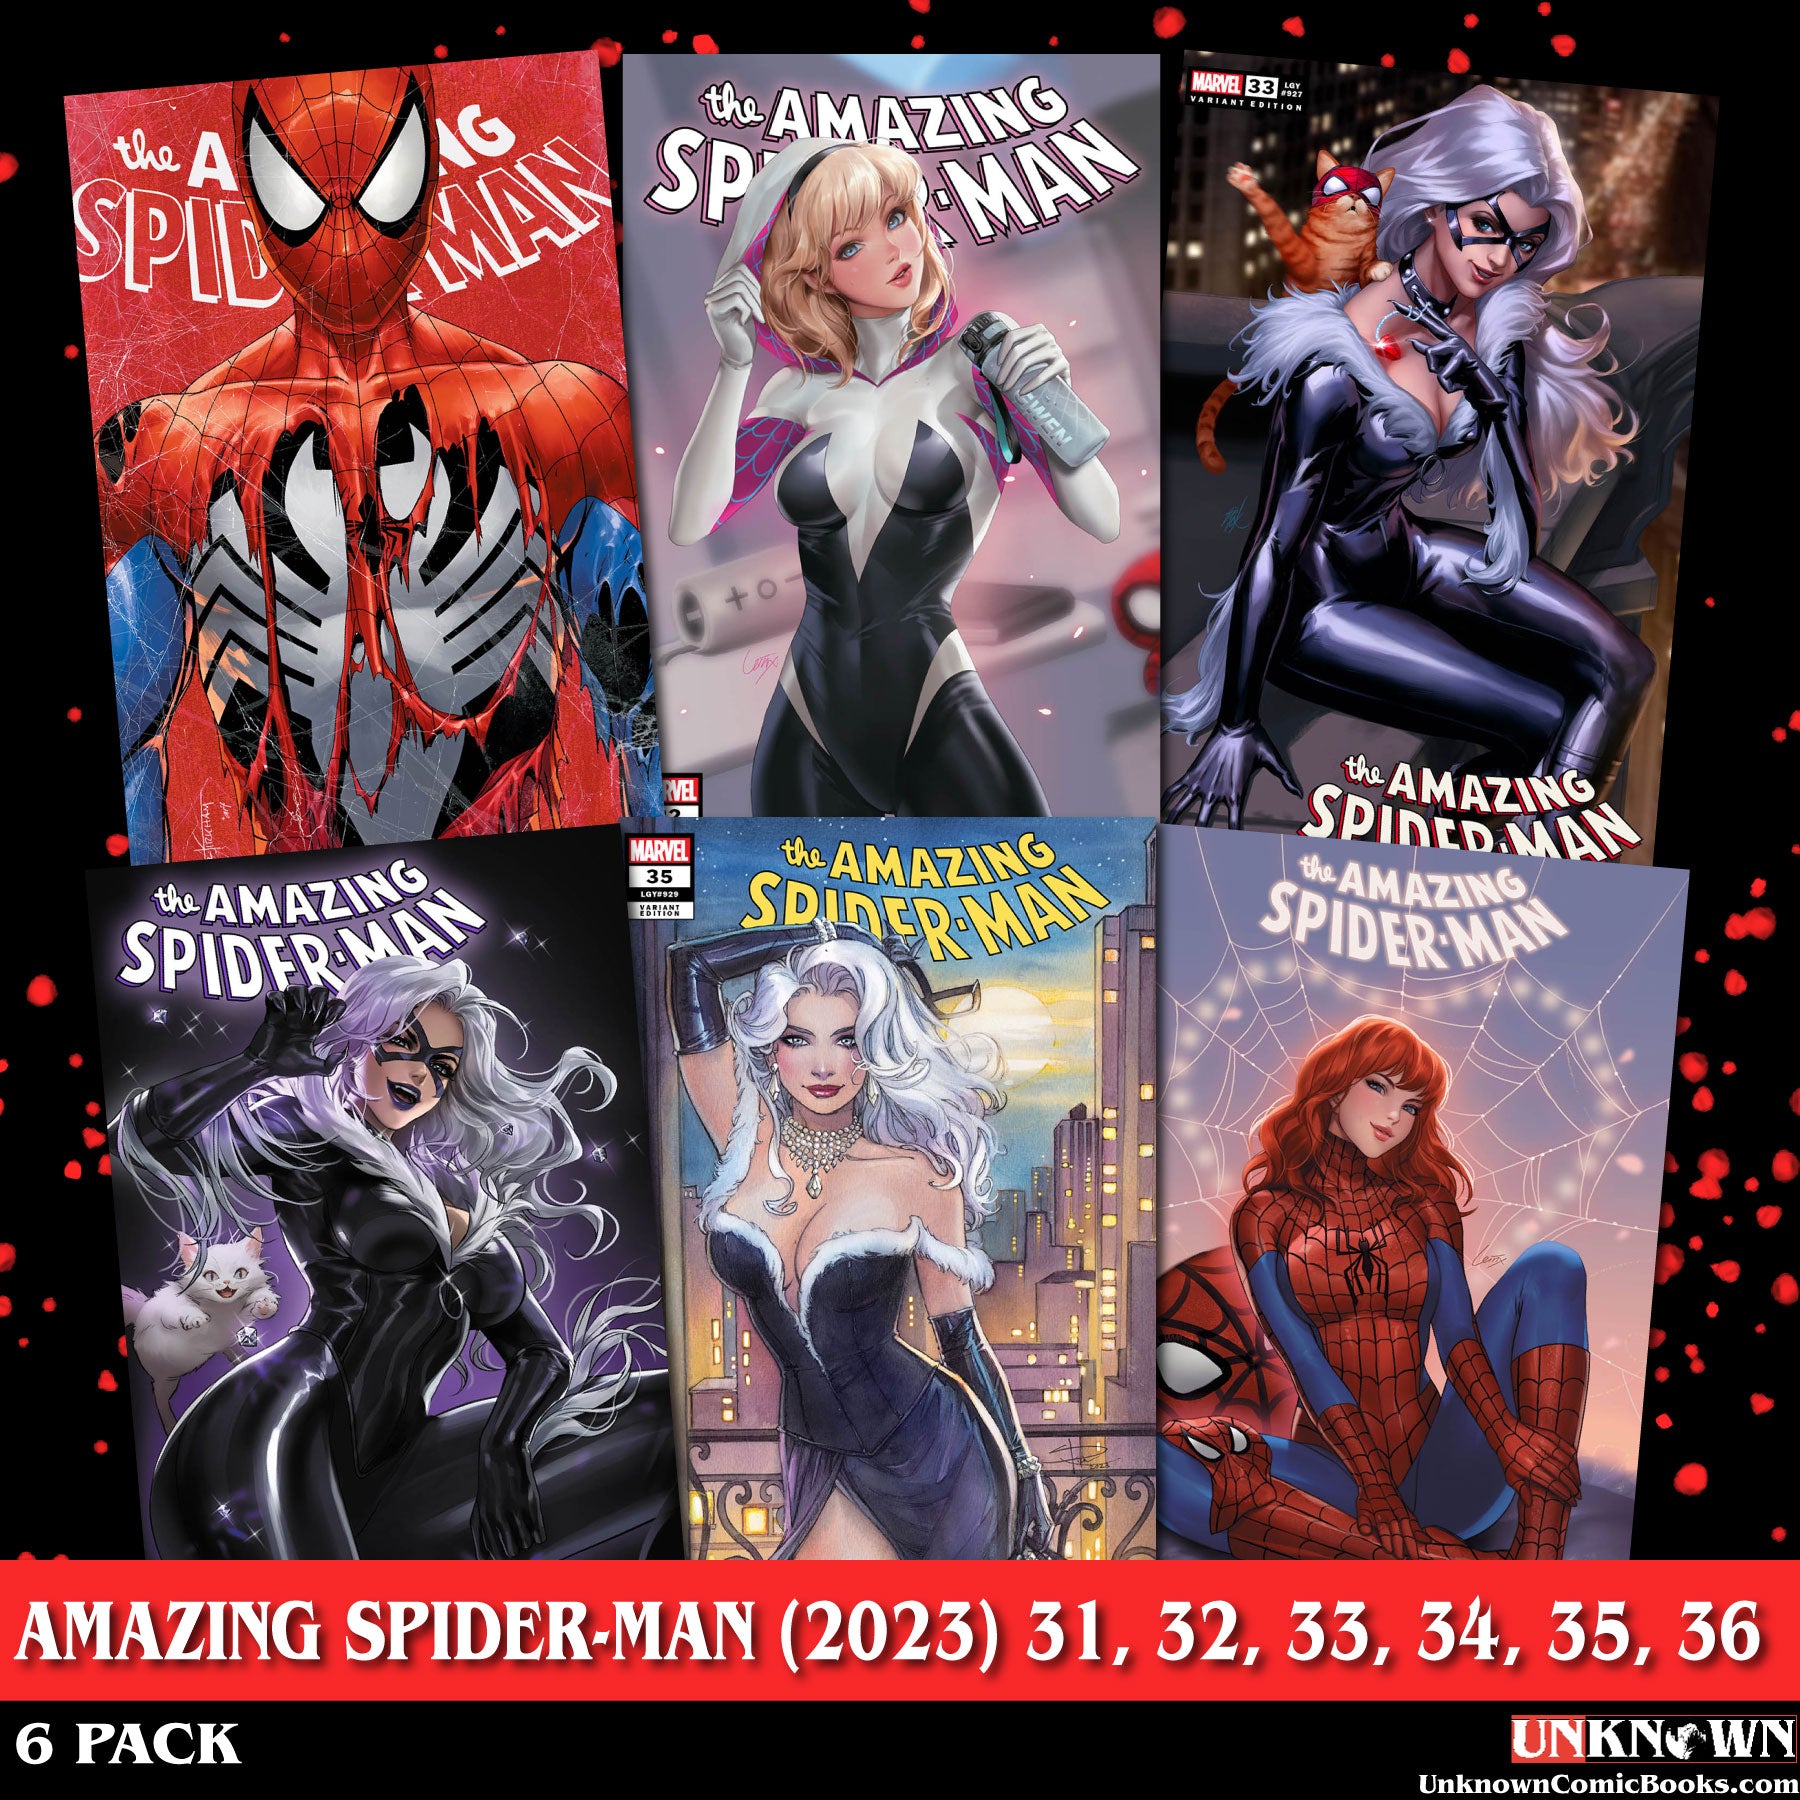 The Amazing Spider-Man #34 Reviews